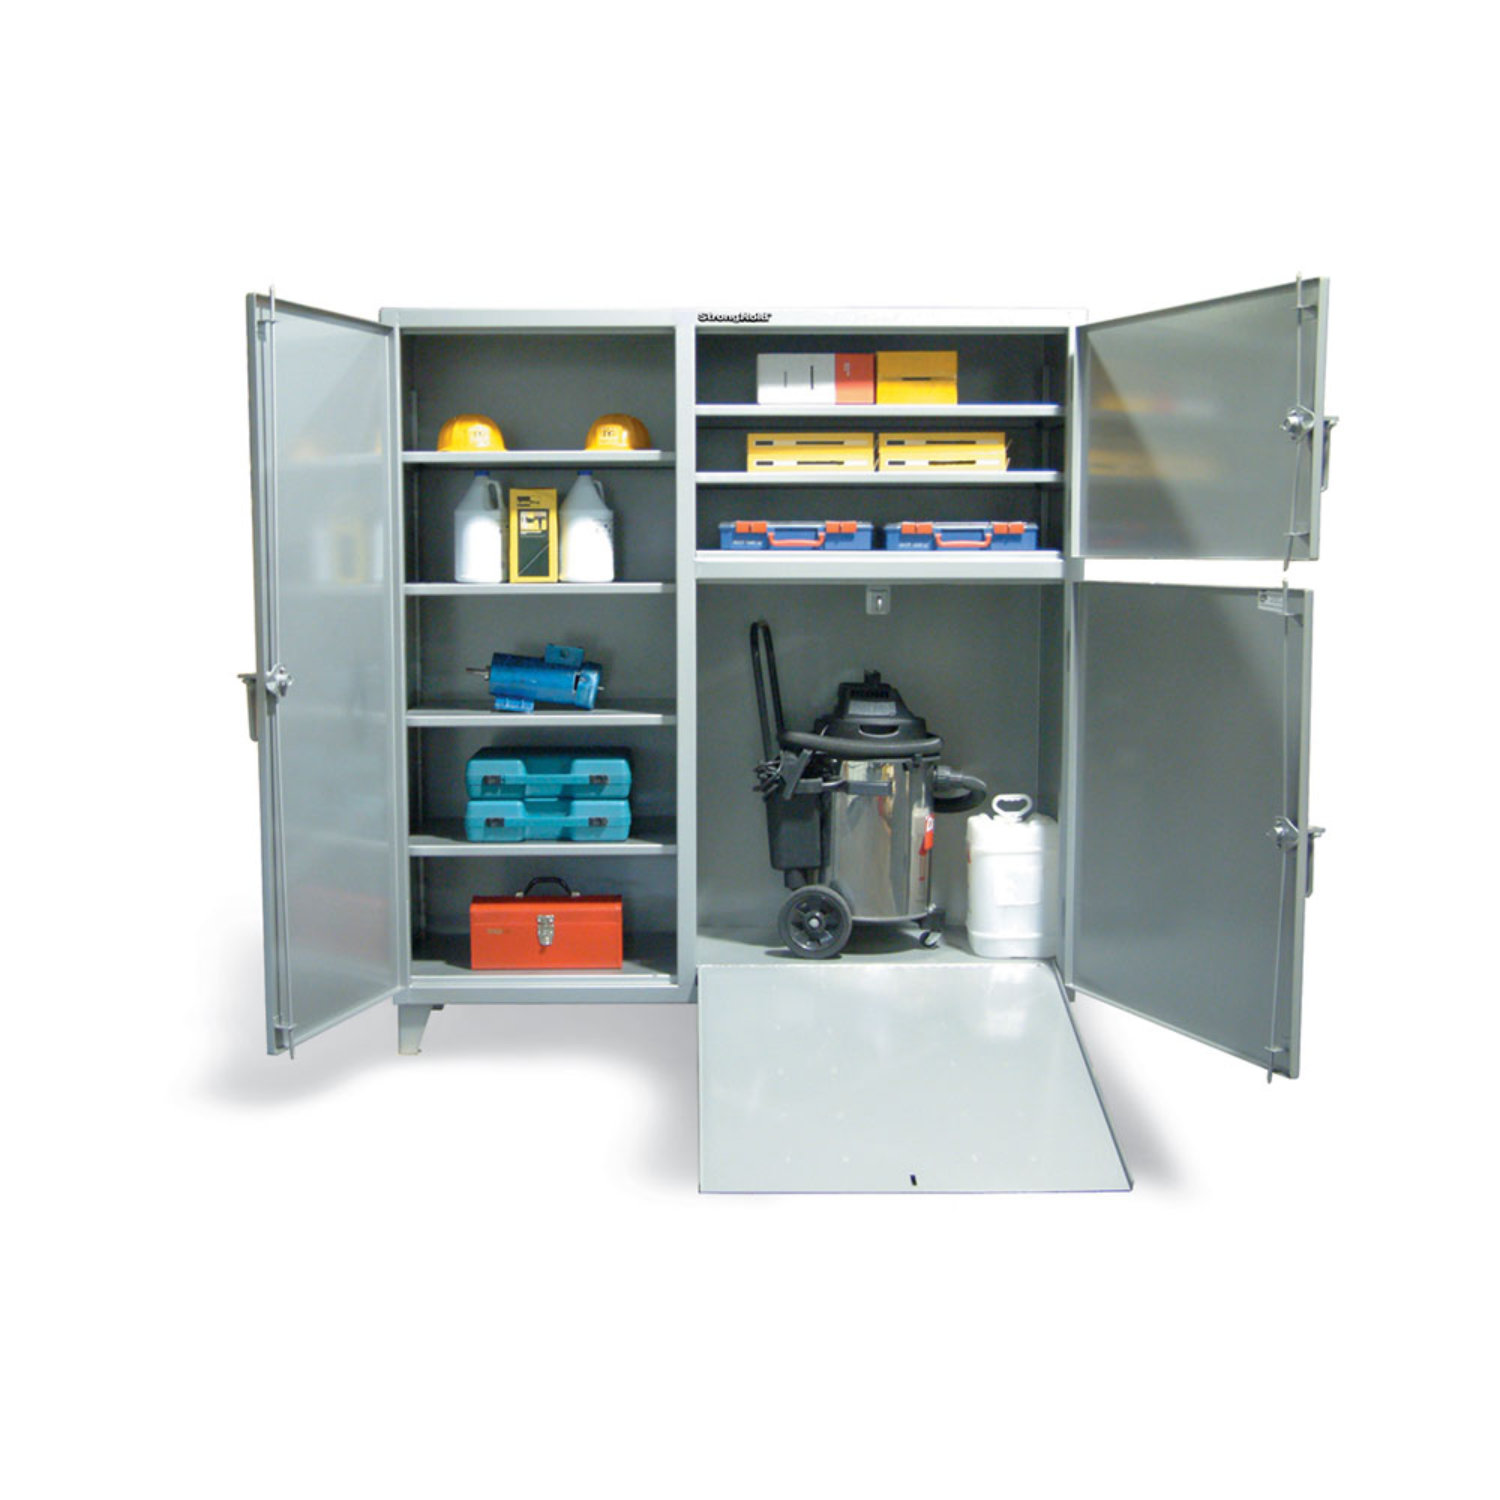 Janitorial Storage Cabinet With Vac